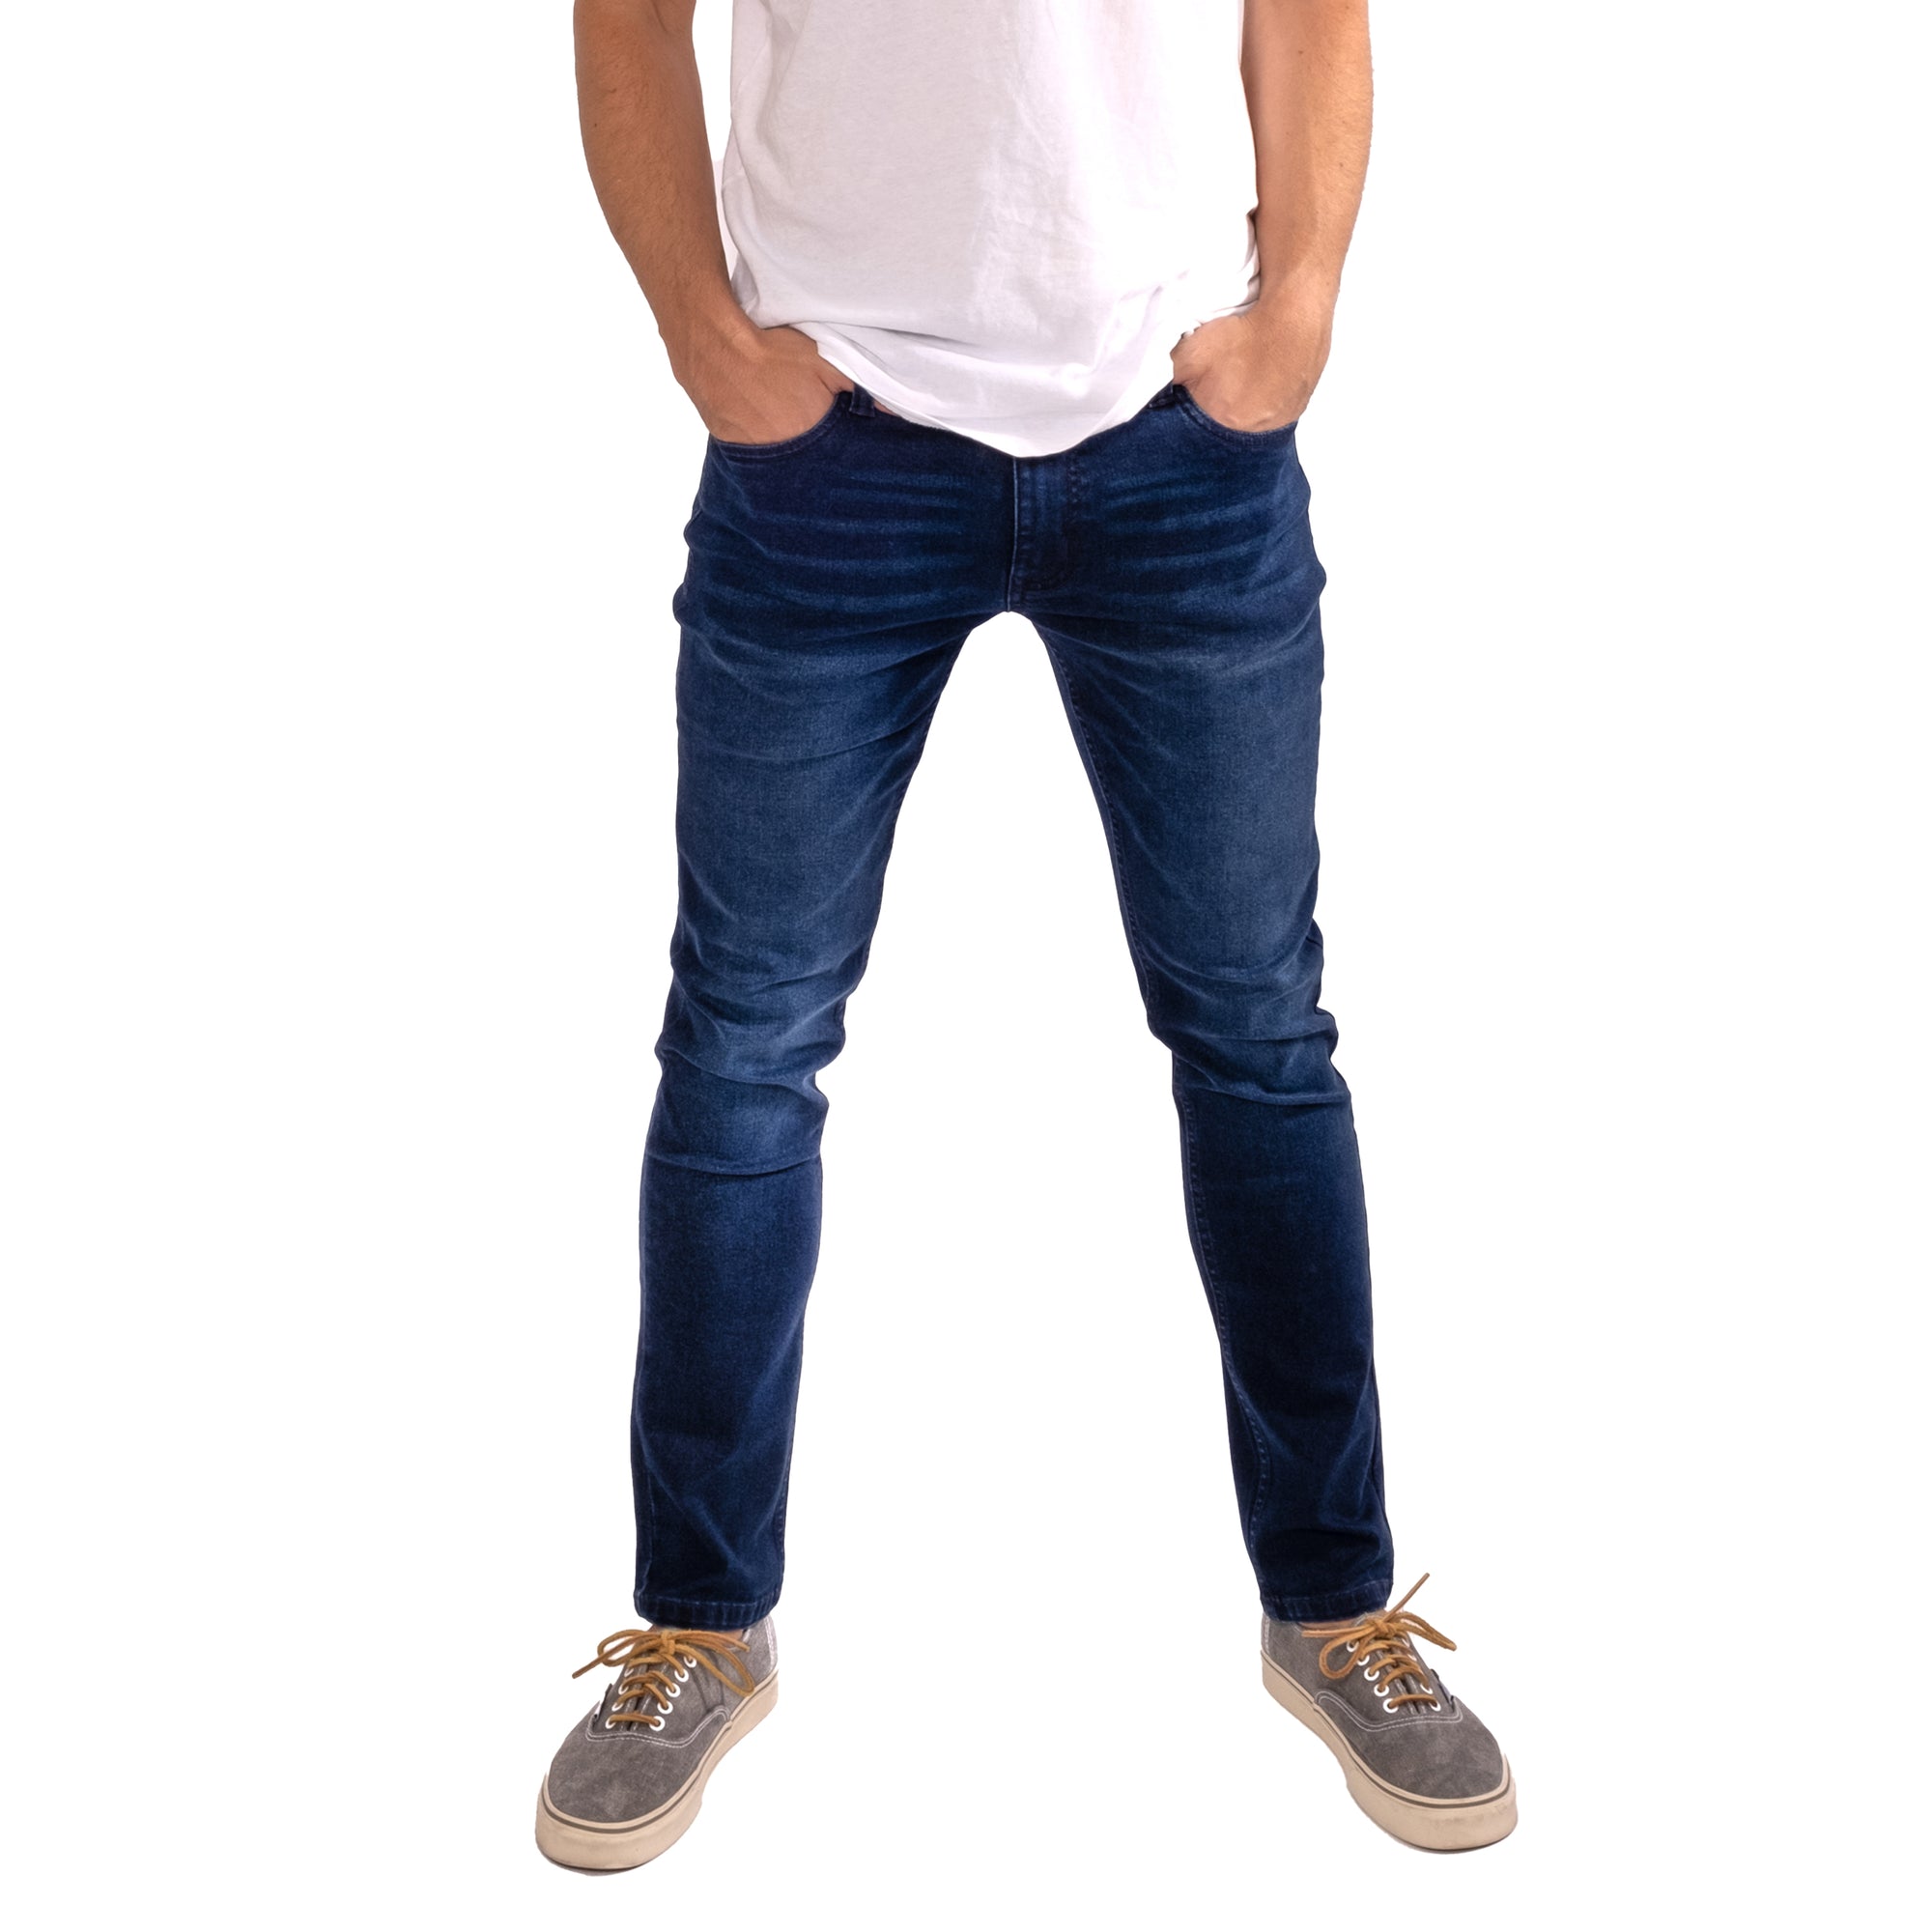 Skinny Fit / Knight - Dark Blue Skinny Jeans | The Perfect Jean | Stretchjeans